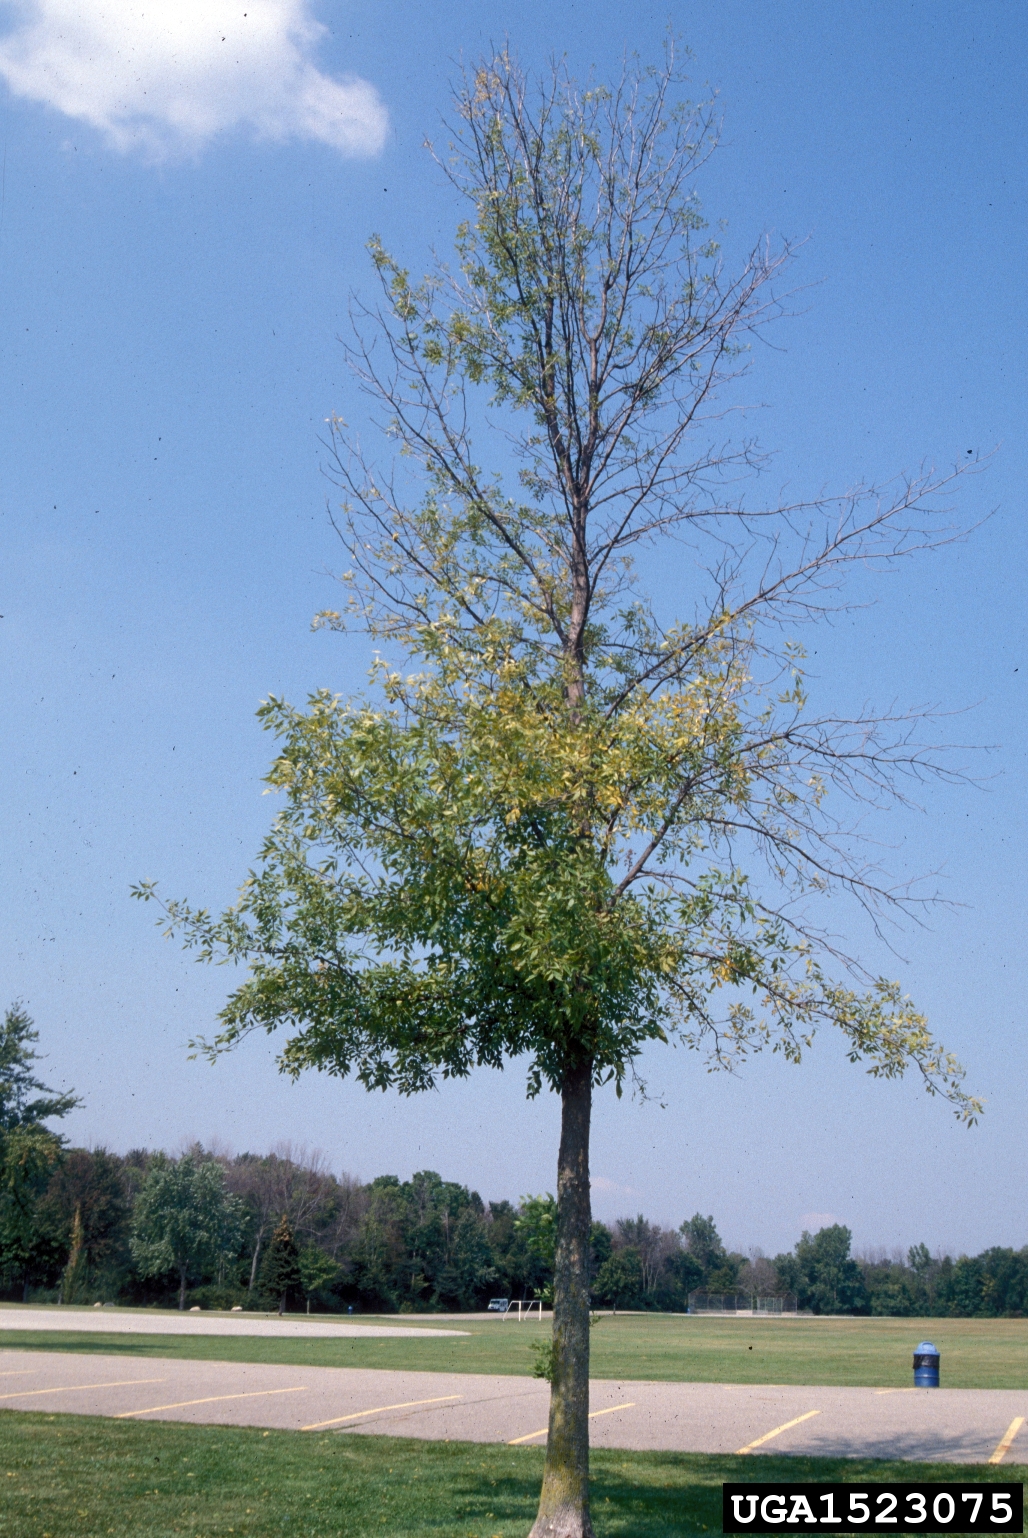 crown dieback (photo by Daniel Herms, The Ohio State University)